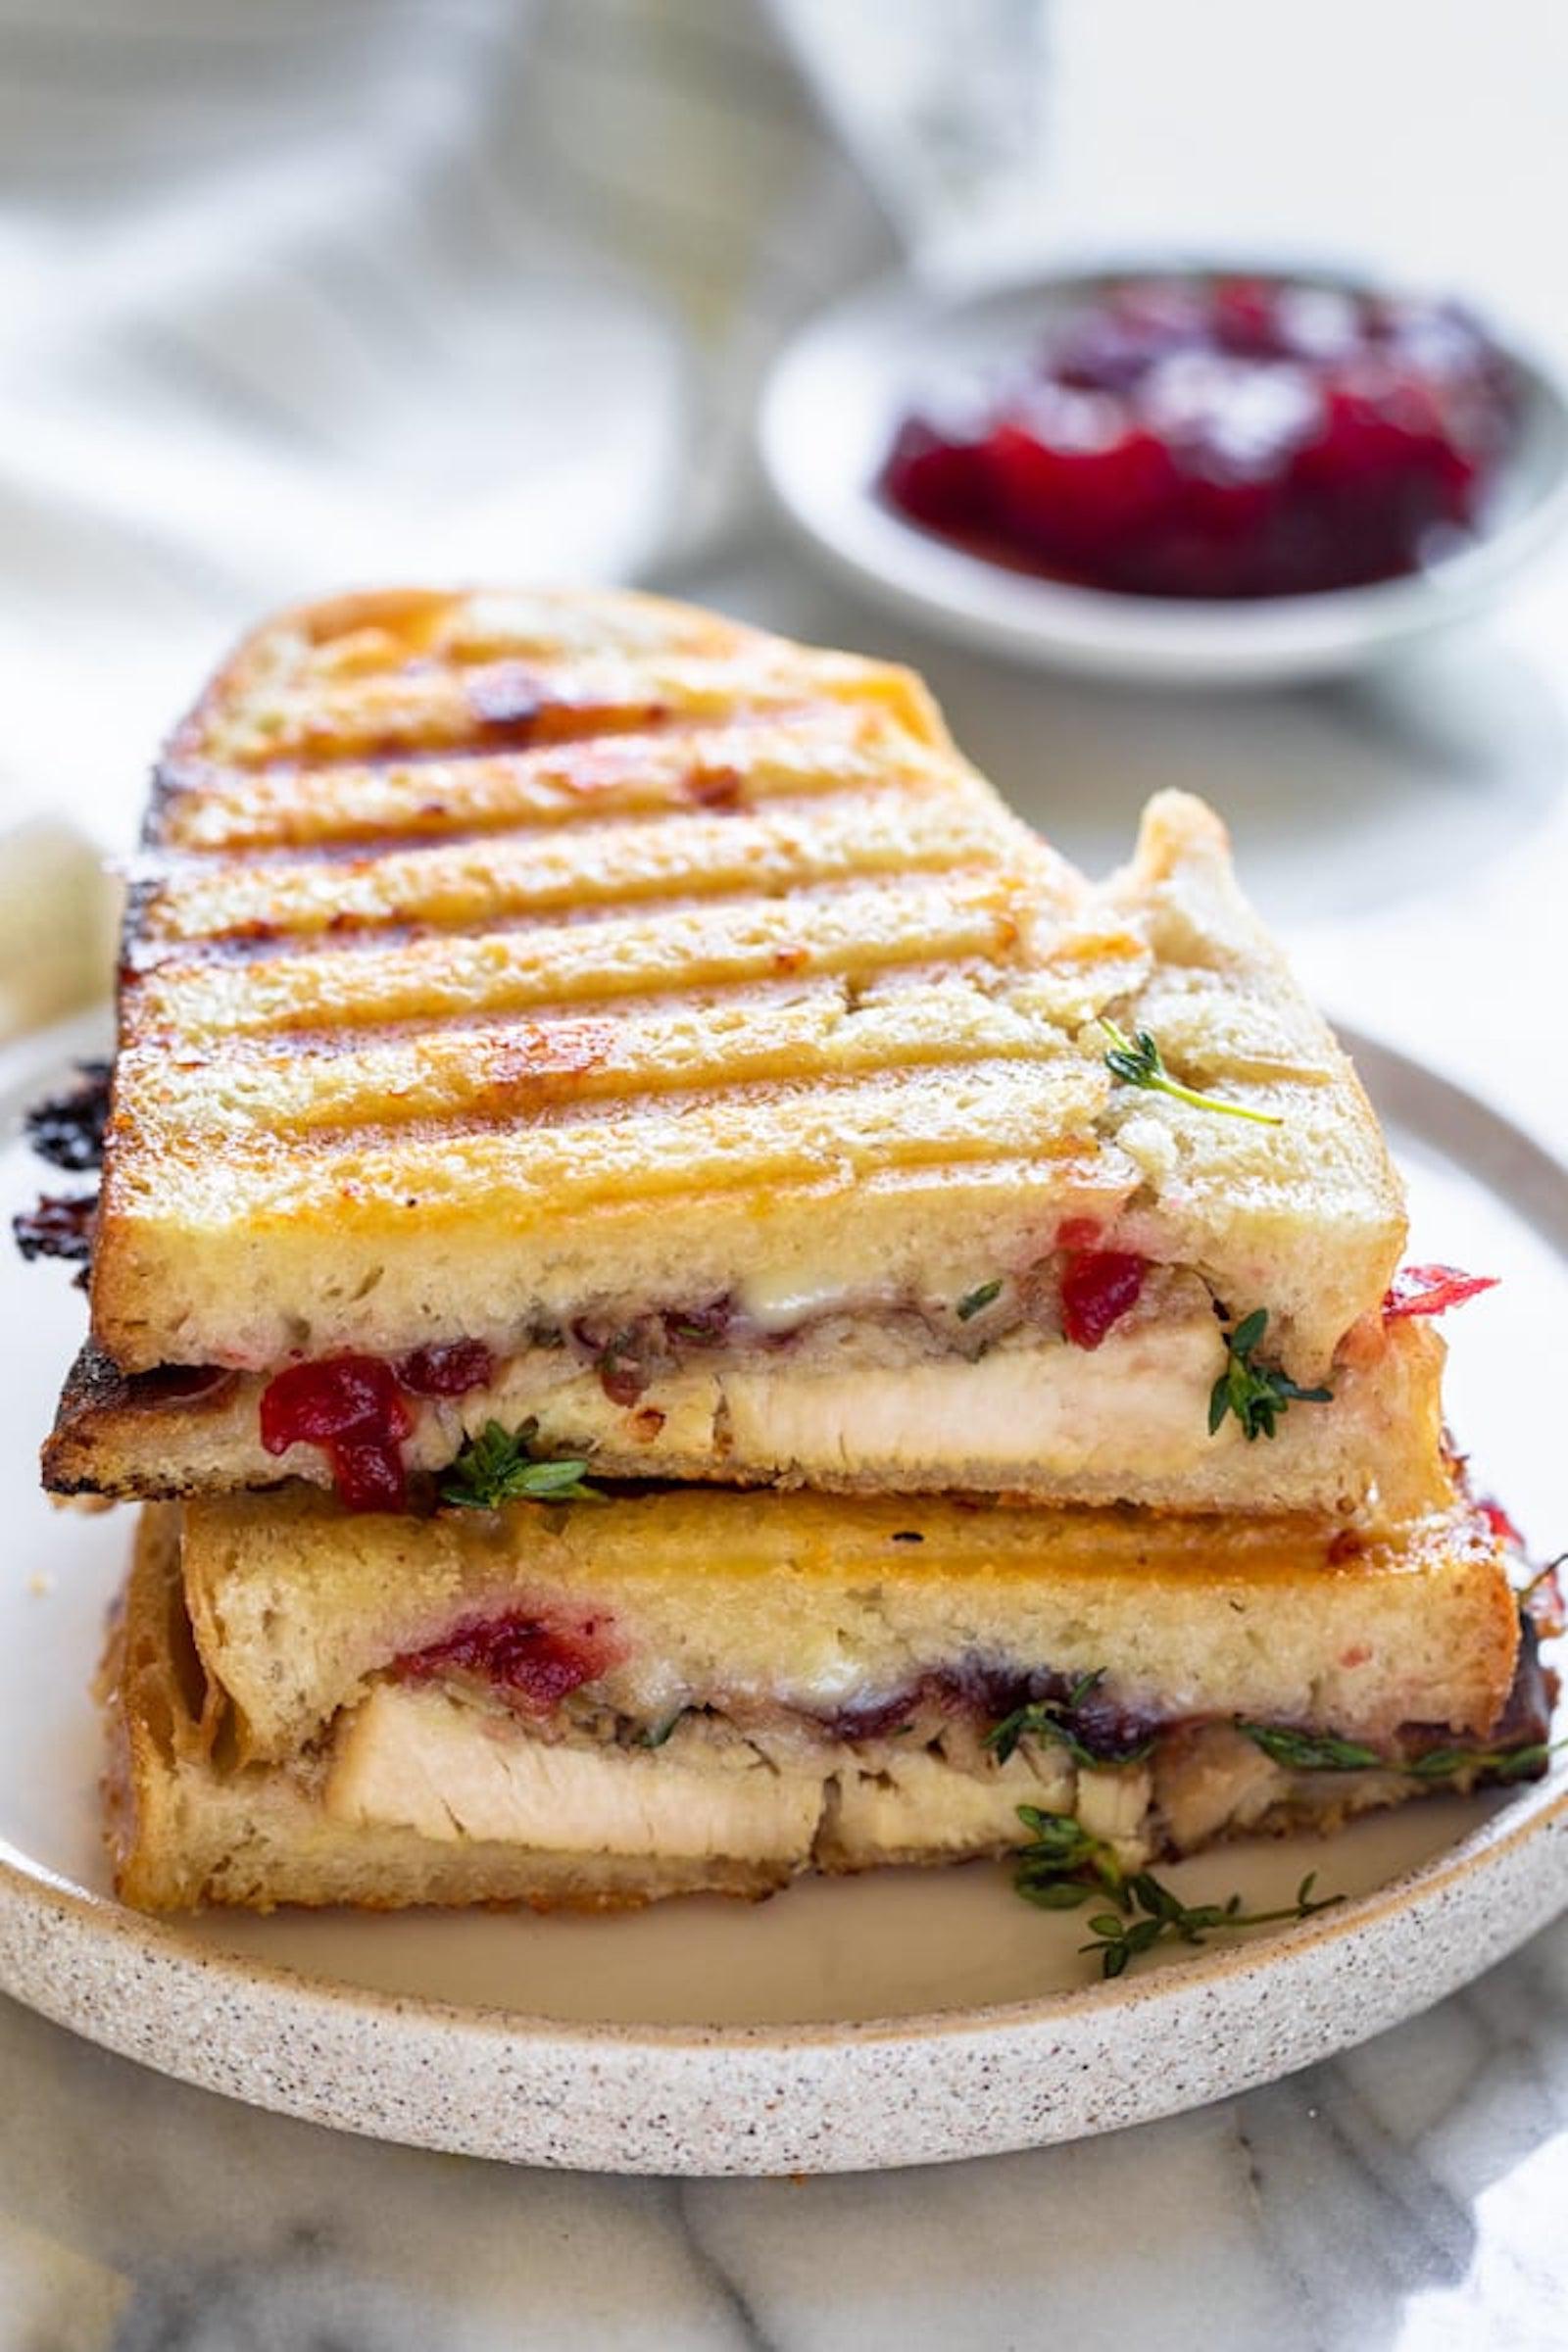 It doesn't have to be Thanksgiving to enjoy a turkey-cranberry-cheese sandwich. We'd eat this every day of the year. (via <strong><a href="https://feelgoodfoodie.net/recipe/turkey-panini/">Feel Good Foodie</a></strong>)